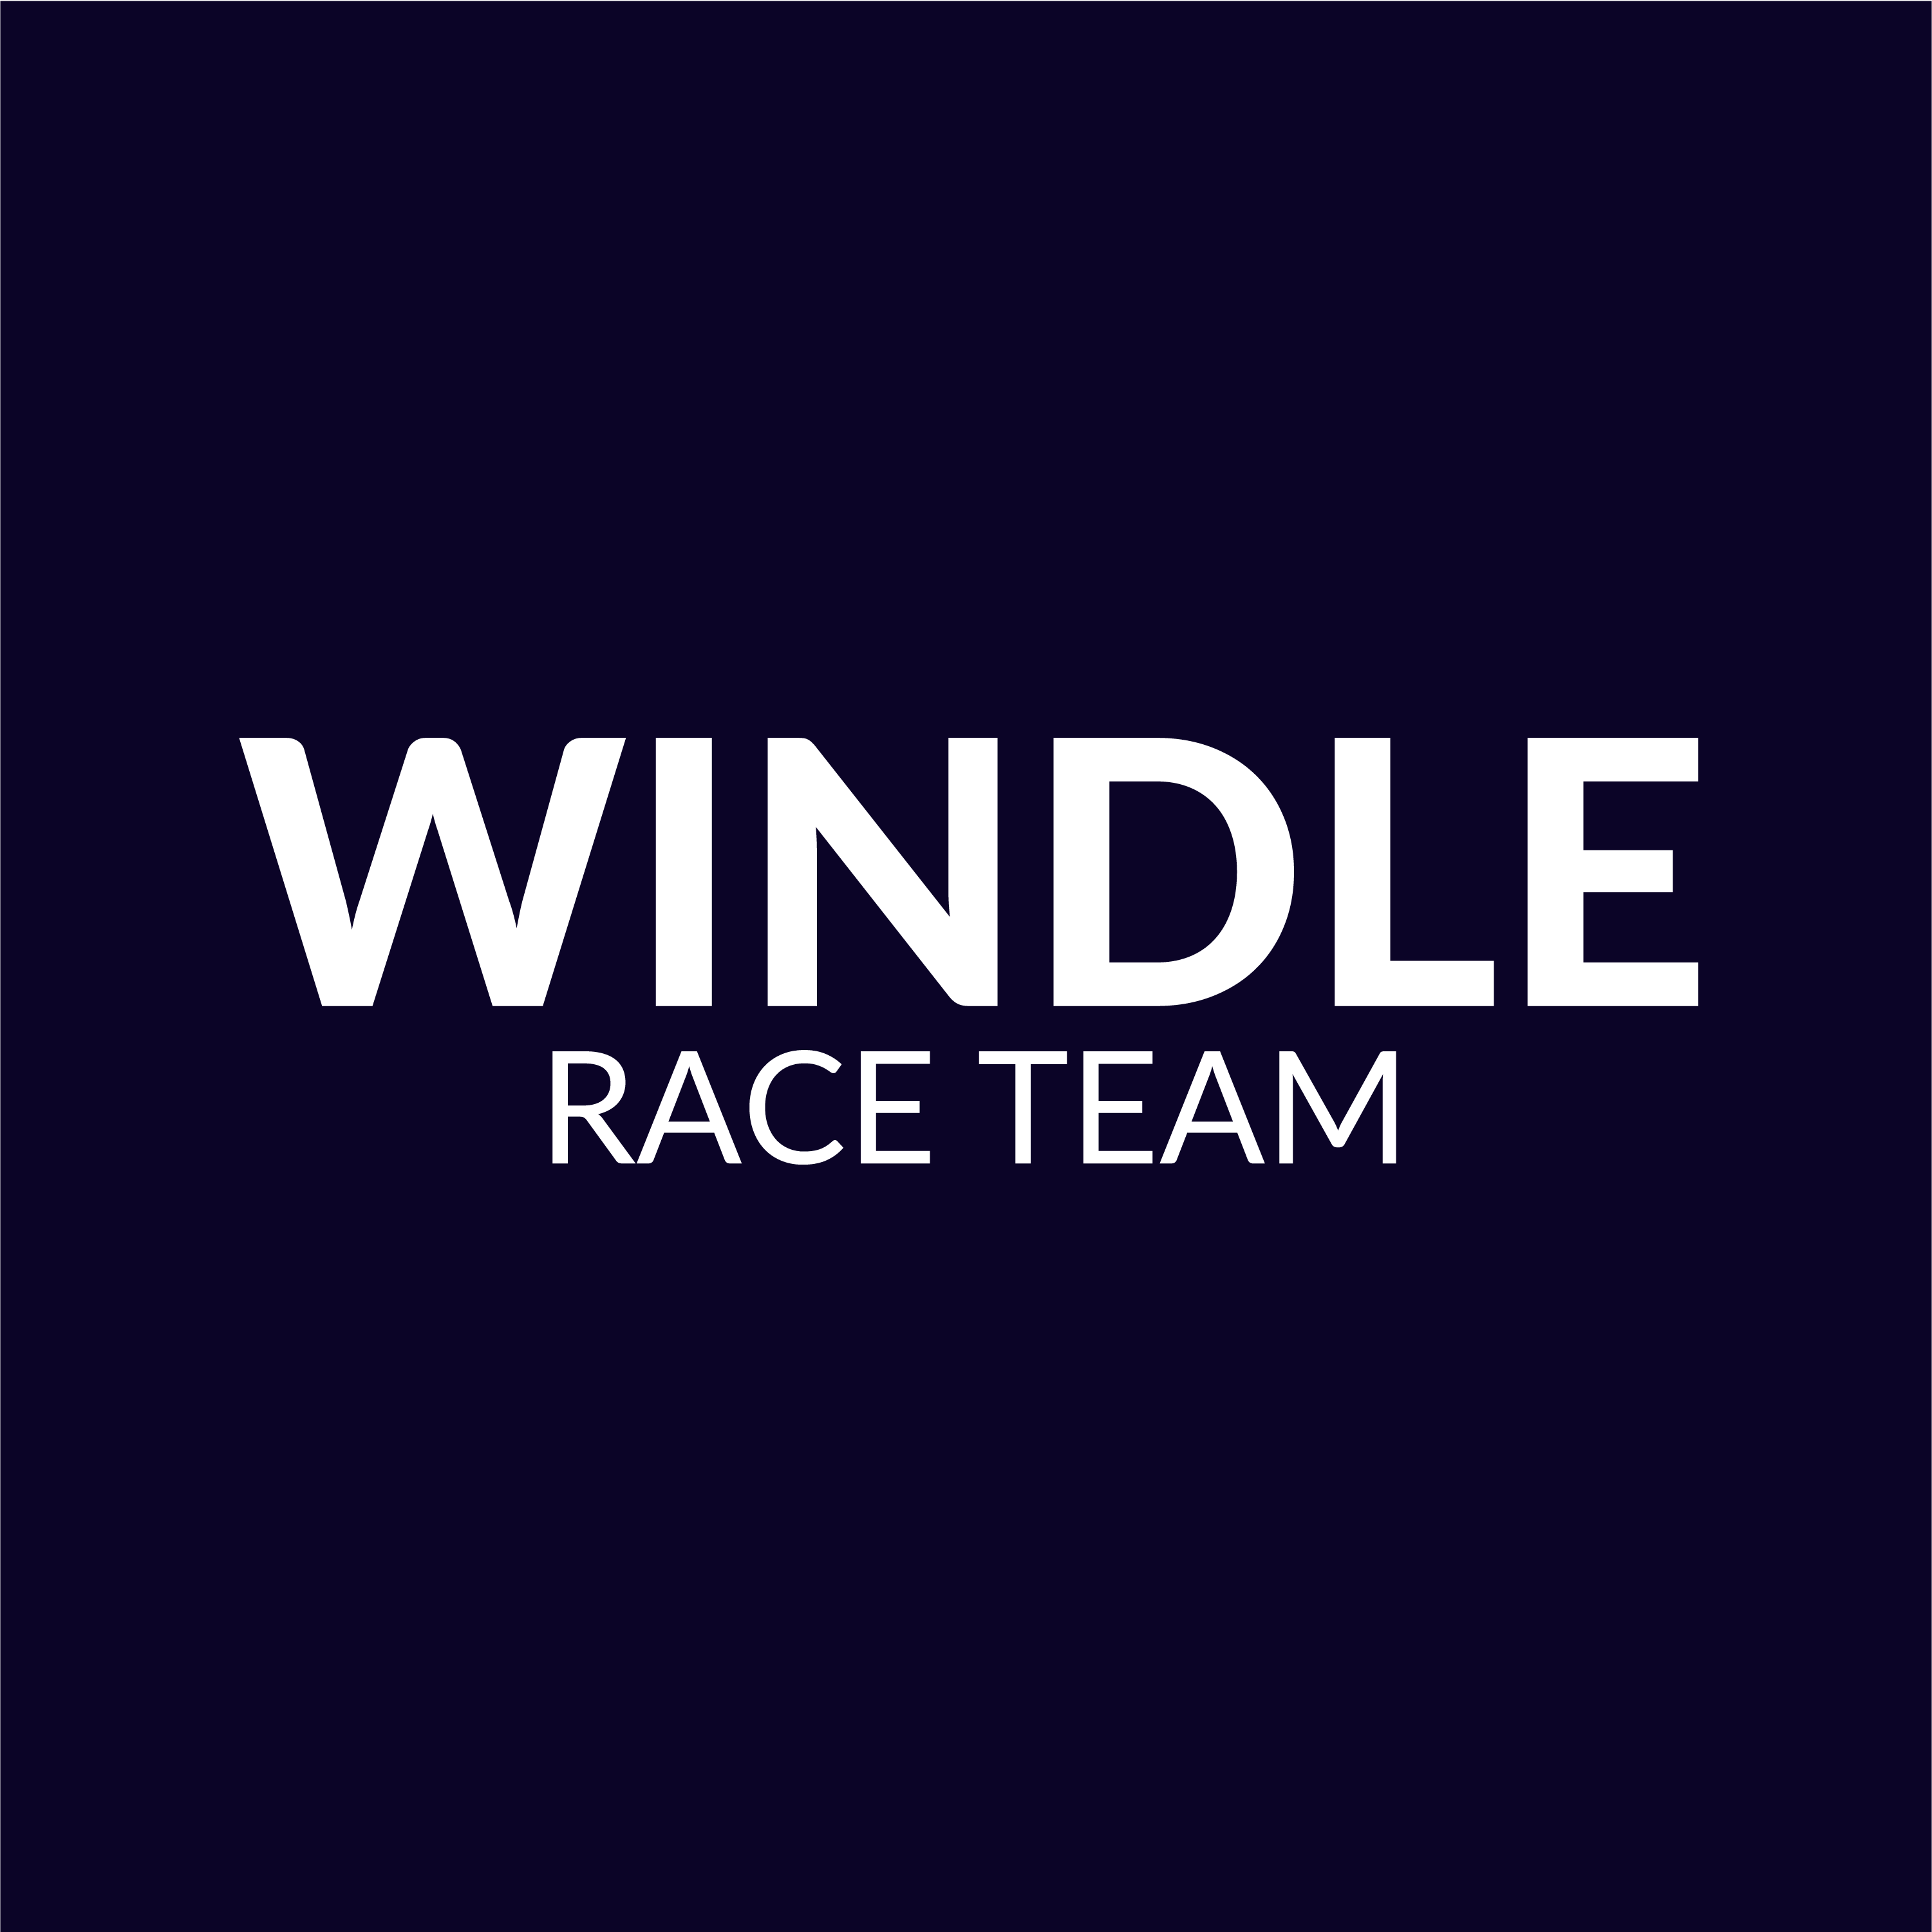 Club Image for WINDLE RACE TEAM